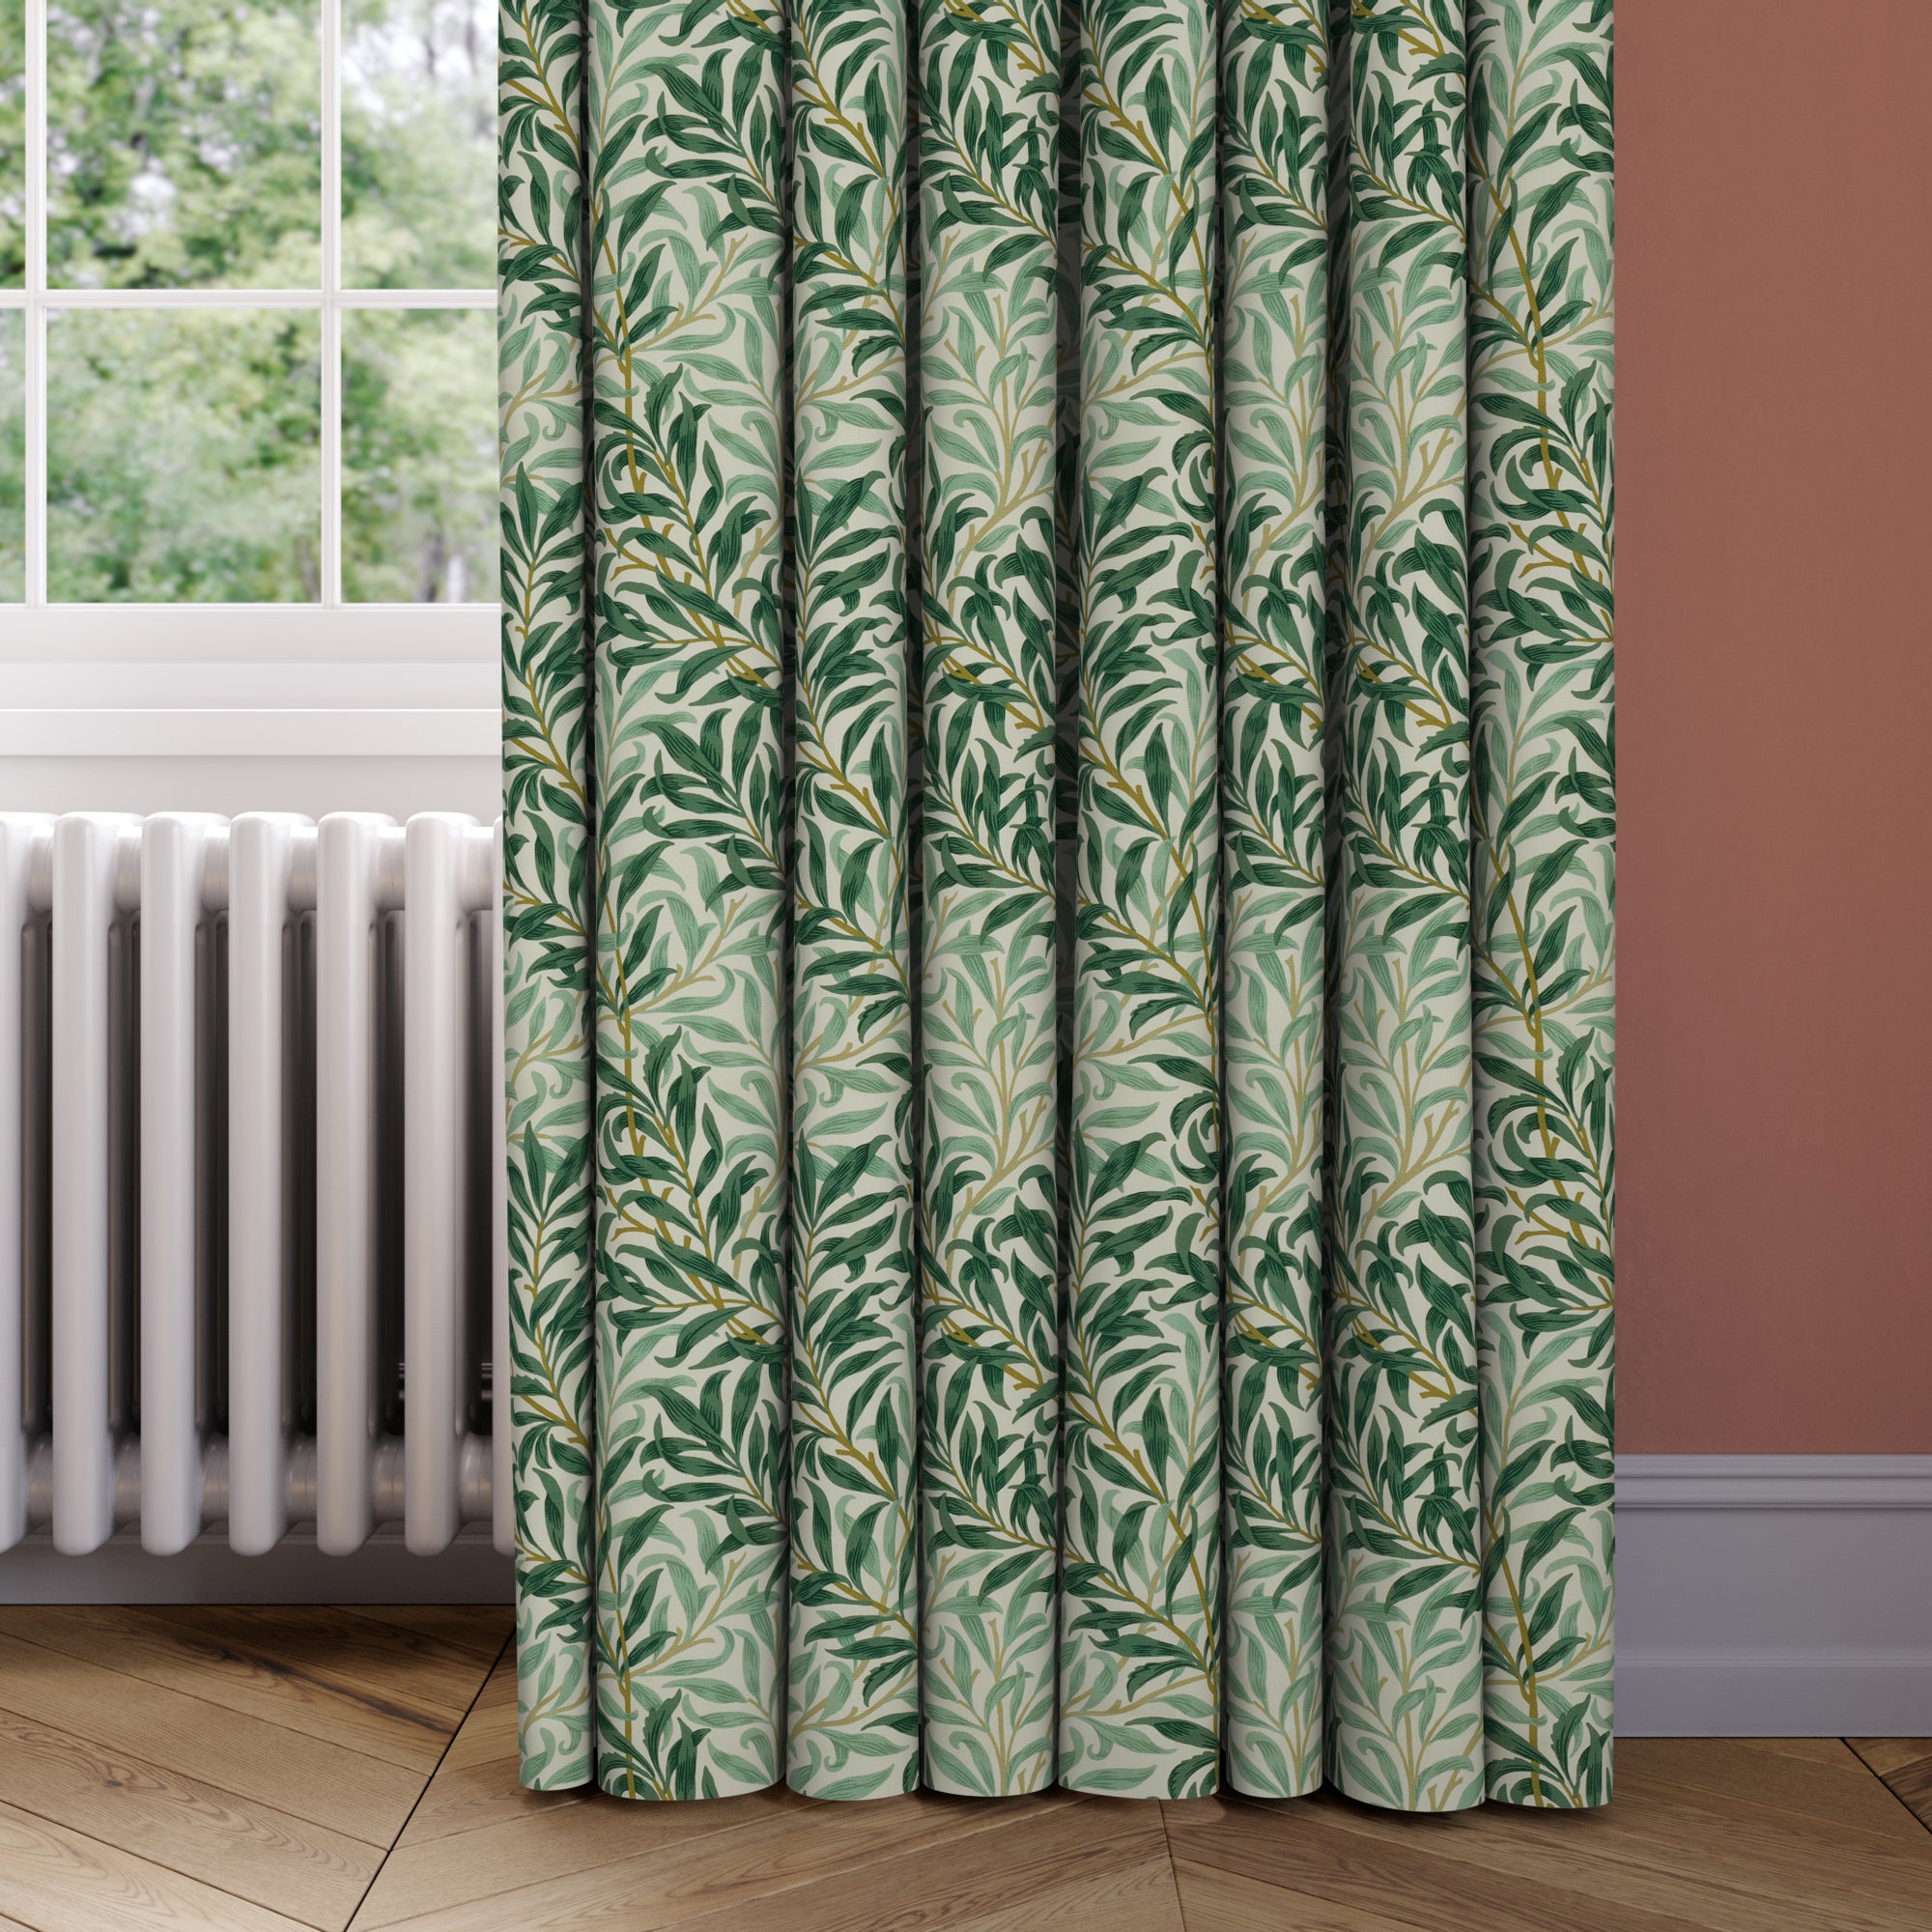 William Morris At Home Willow Bough Made To Measure Fabric Sample Willow Bough Teal